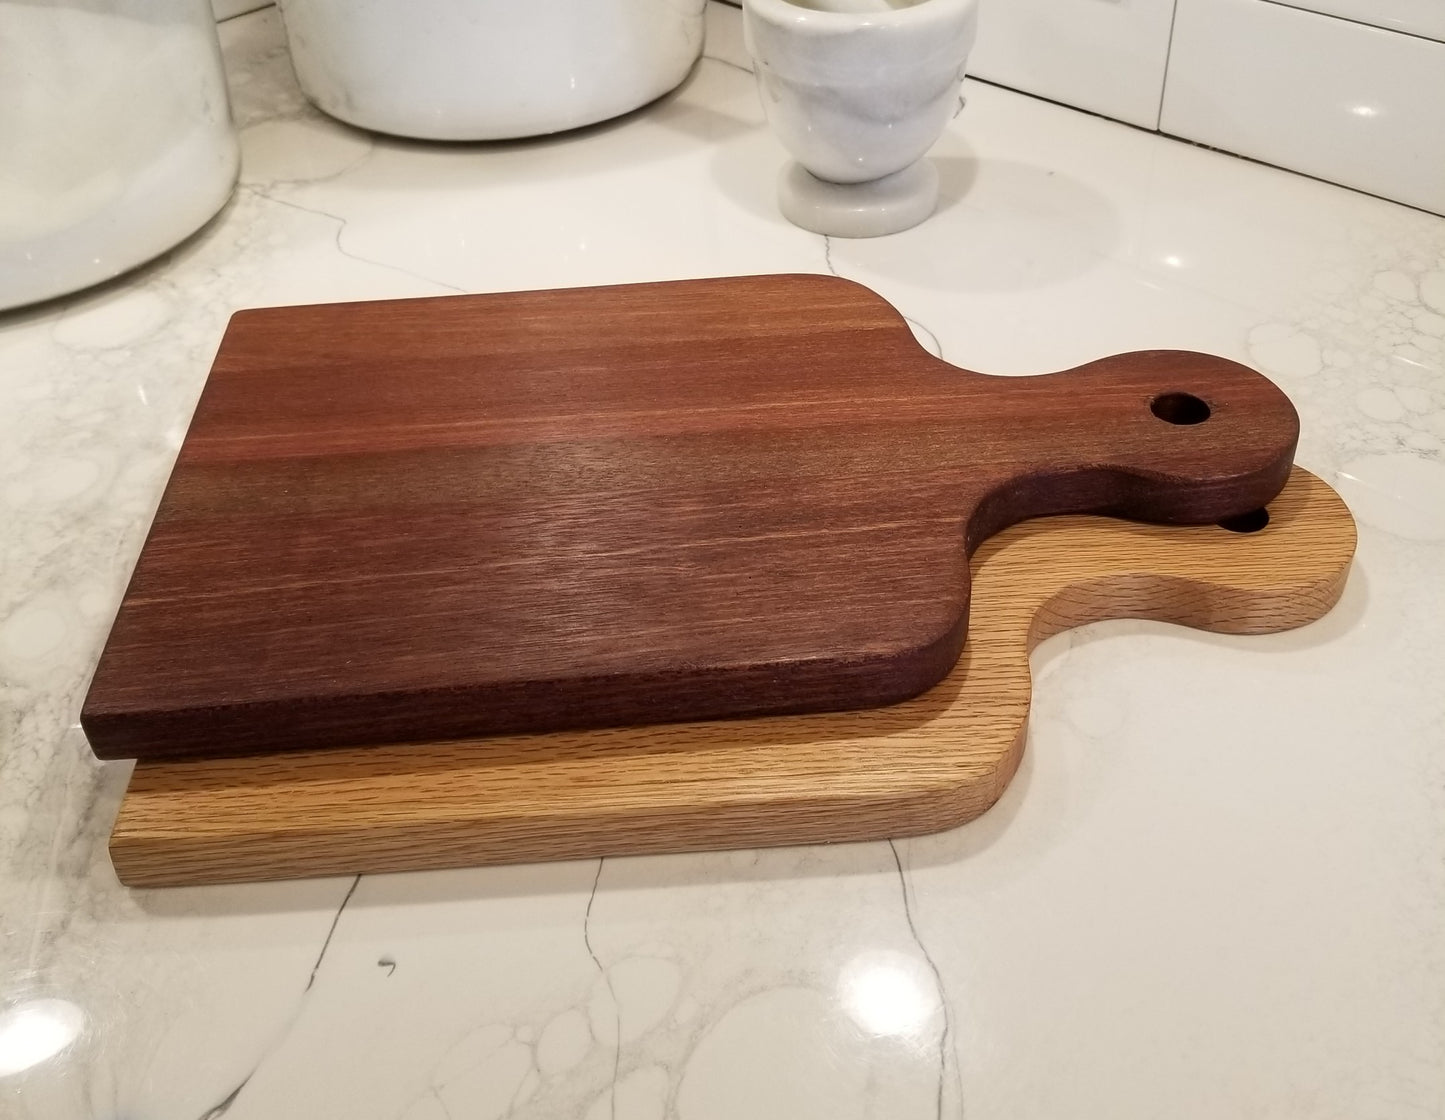 Artisan wood cutting board. Notice the richness of the wood when a bees wax and mineral oil combination are applied for protection.